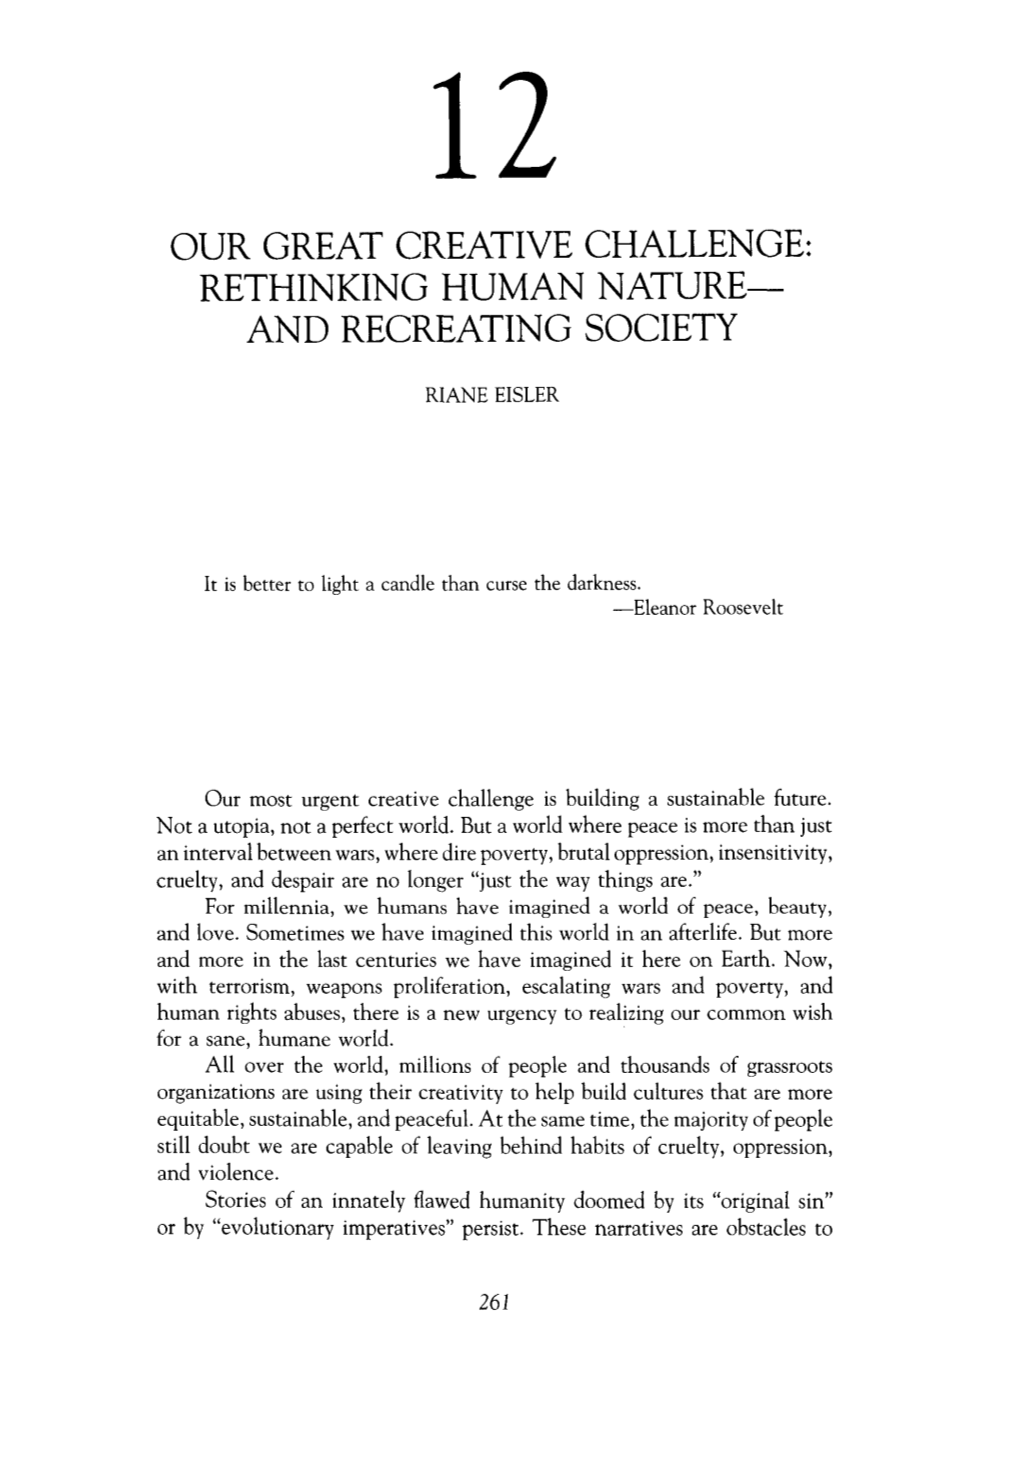 Our Great Creative Challenge: Rethinking Human Nature— and Recreating Society